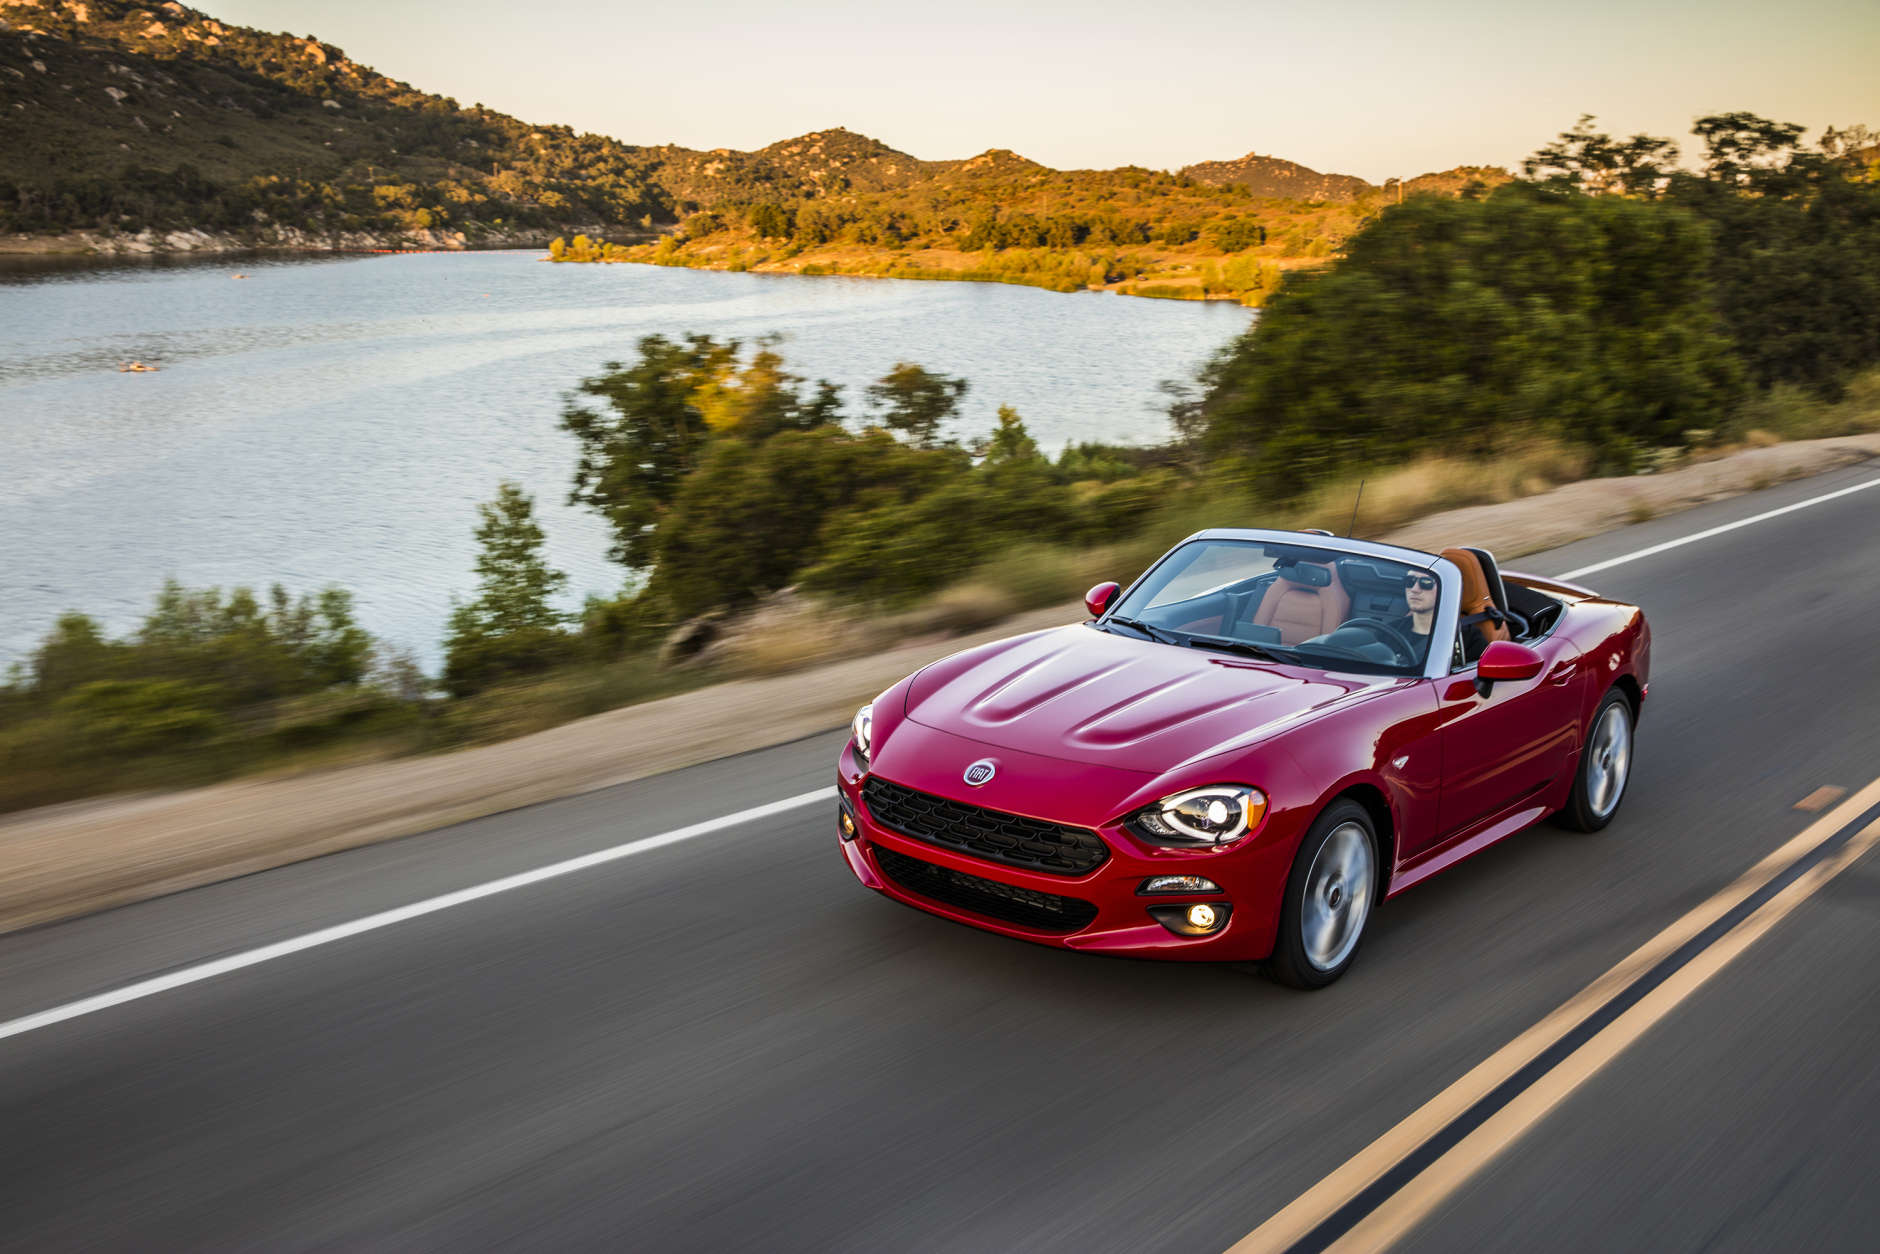 Fiat 124 Spider Abarth, $28,195
When Fiat announced they were resurrecting the classic 124 Spider, many enthusiasts were ecstatic. When the firm announced the architecture would be shared with the Mazda Miata, which made last year's Hot List, roadster fans knew they were in for a treat. With a 0 to 60 mph sprint in a healthy 6.3 seconds, the 124 Spider provides more power than its cousin through a MultiAir turbo engine with true Italian verve.
